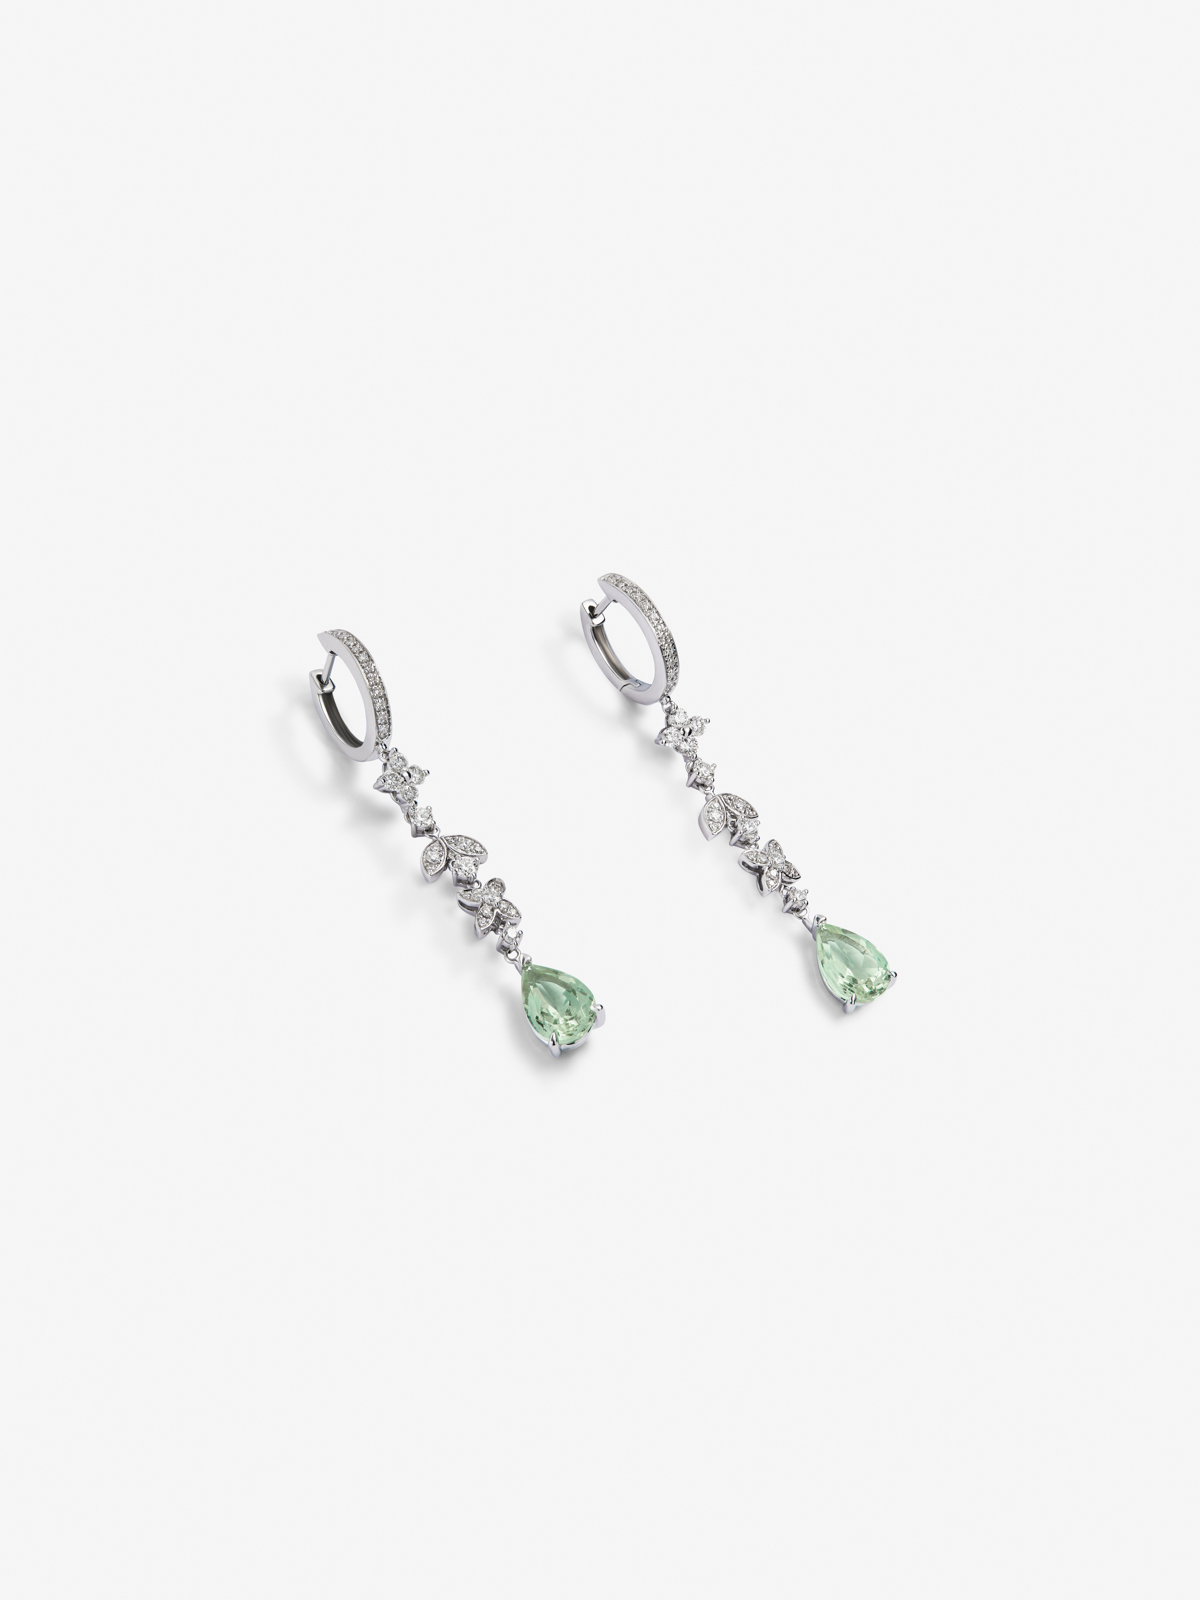 18K white gold earrings with 0.78 ct brilliant-cut diamonds and pear-cut green amethysts